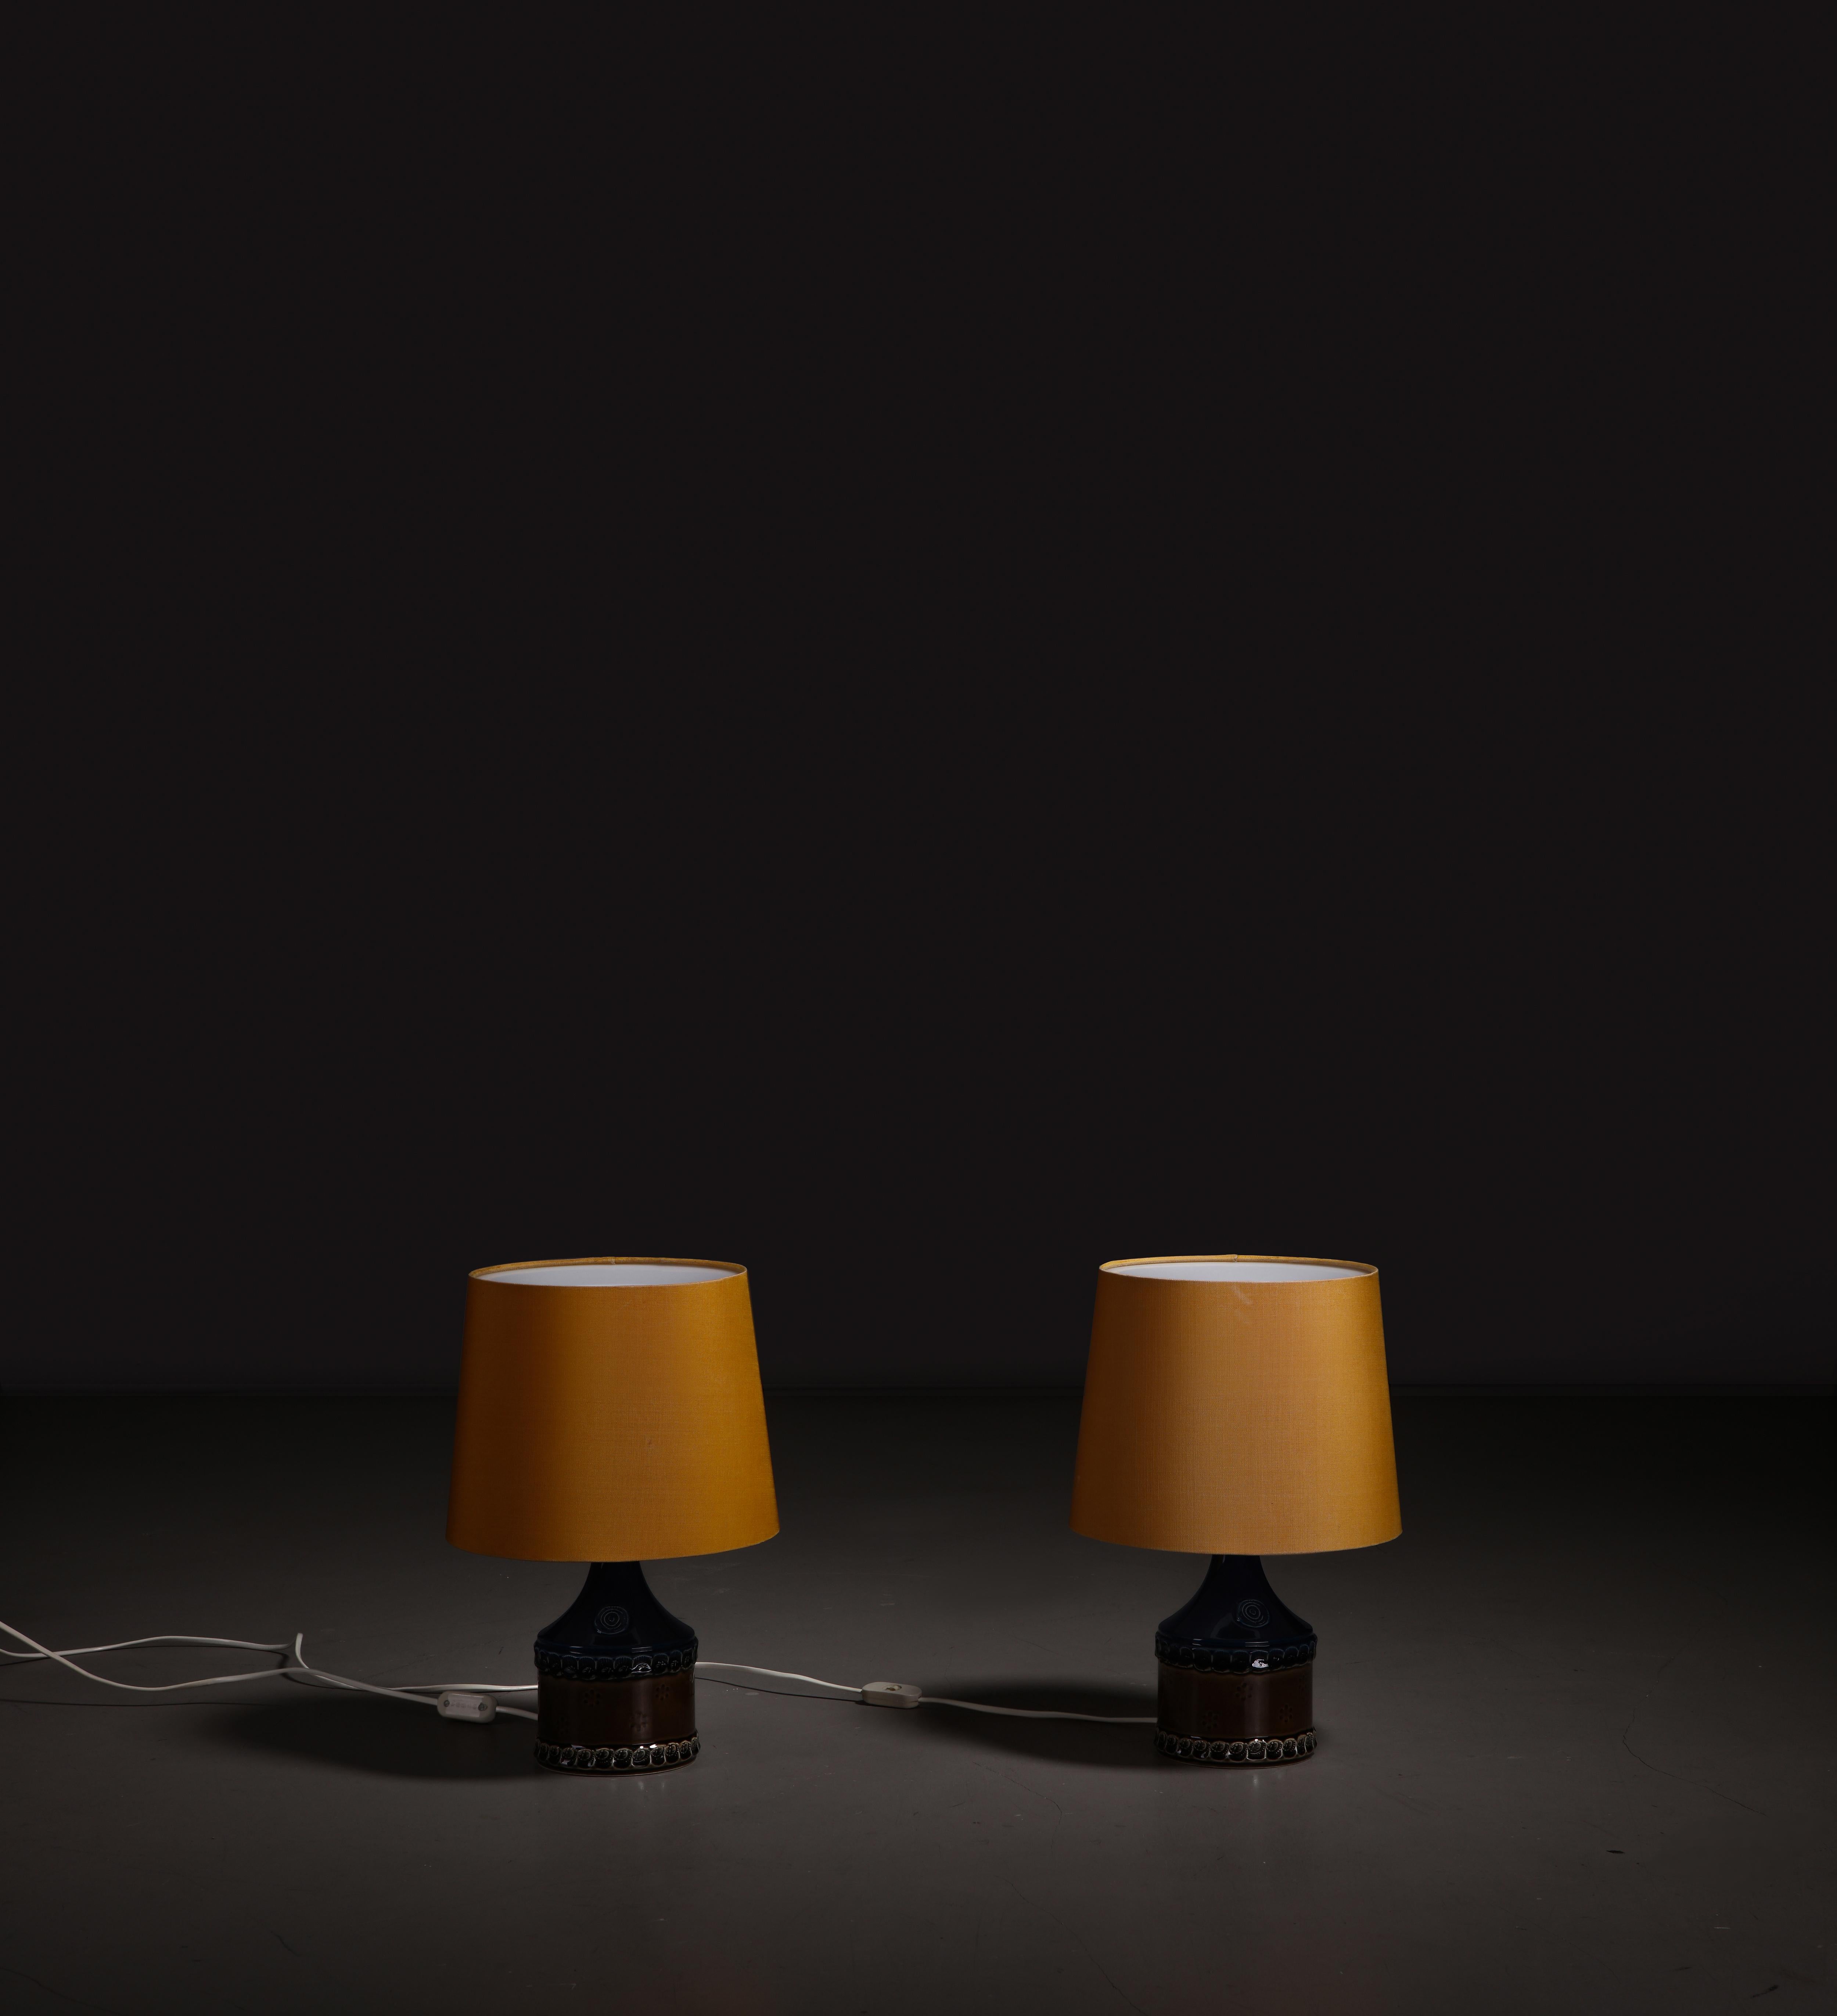 Pair of porcelain table lamps designed by Bjørn Wiinblad and manufactured by Rosenthal, Germany, 1960s.

This pair of rare porcelain table lamps is a true testament to the timeless elegance of mid-century design. Manufactured by Rosenthal in the